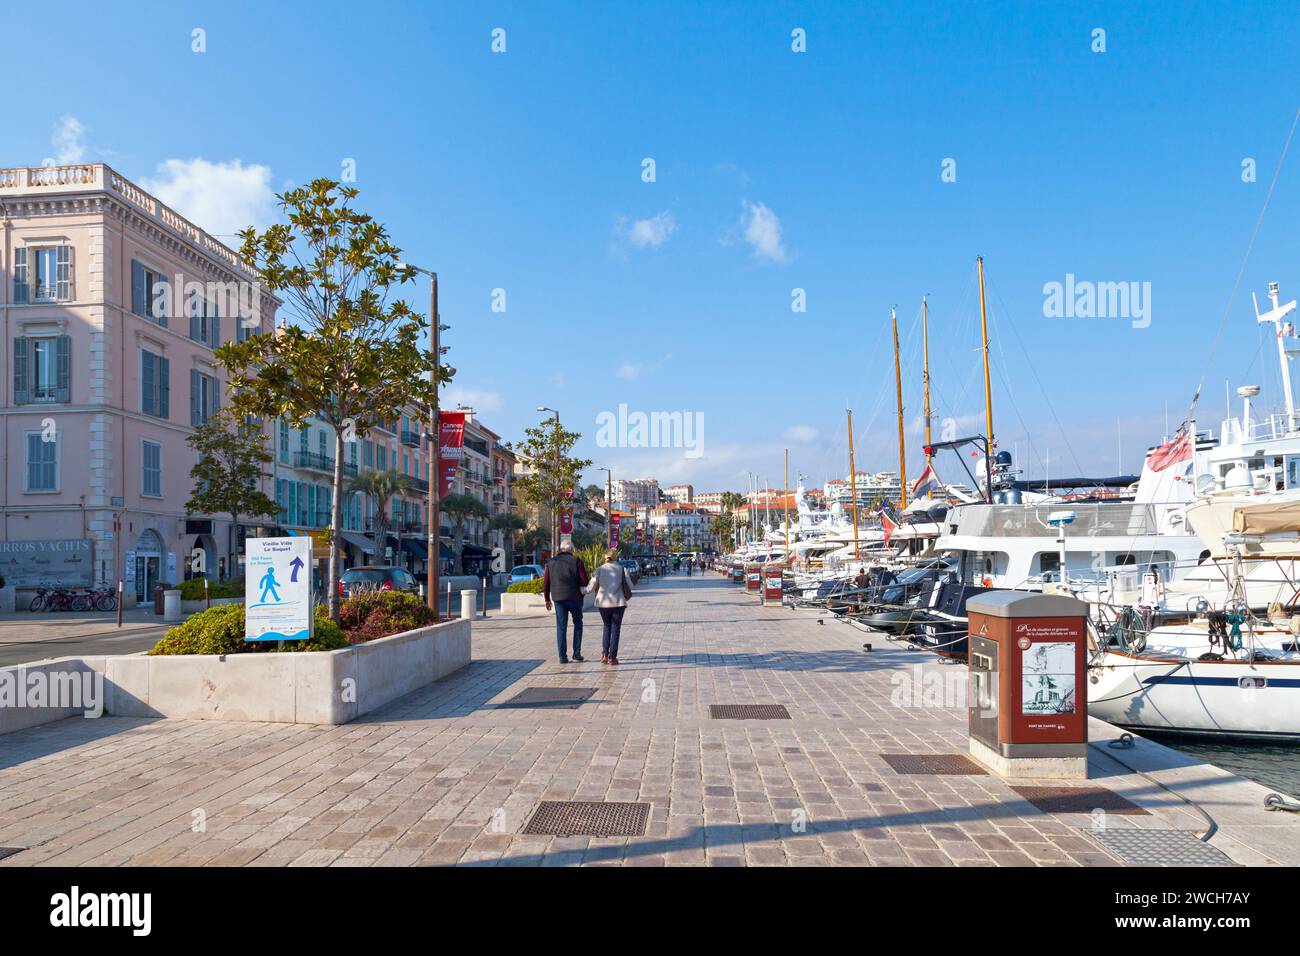 Cannes, France - March 25 2019: St. Peter's quay along the Old Port of Cannes. Stock Photo